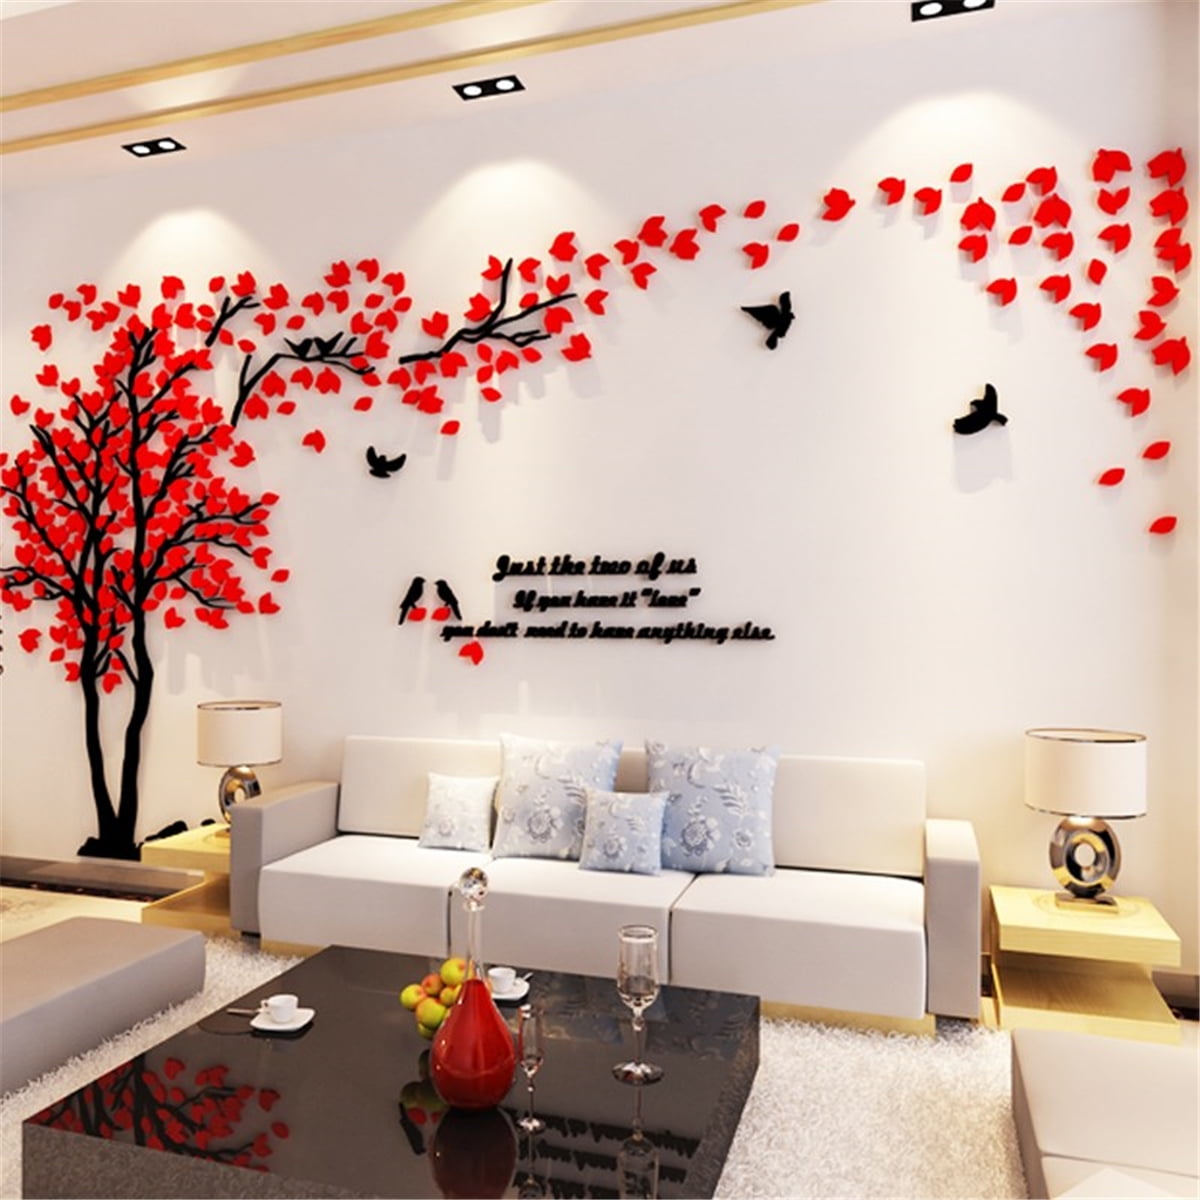 Couple Body Wall Mural Photo Wallpaper GIANT DECOR Paper Poster Free Paste 